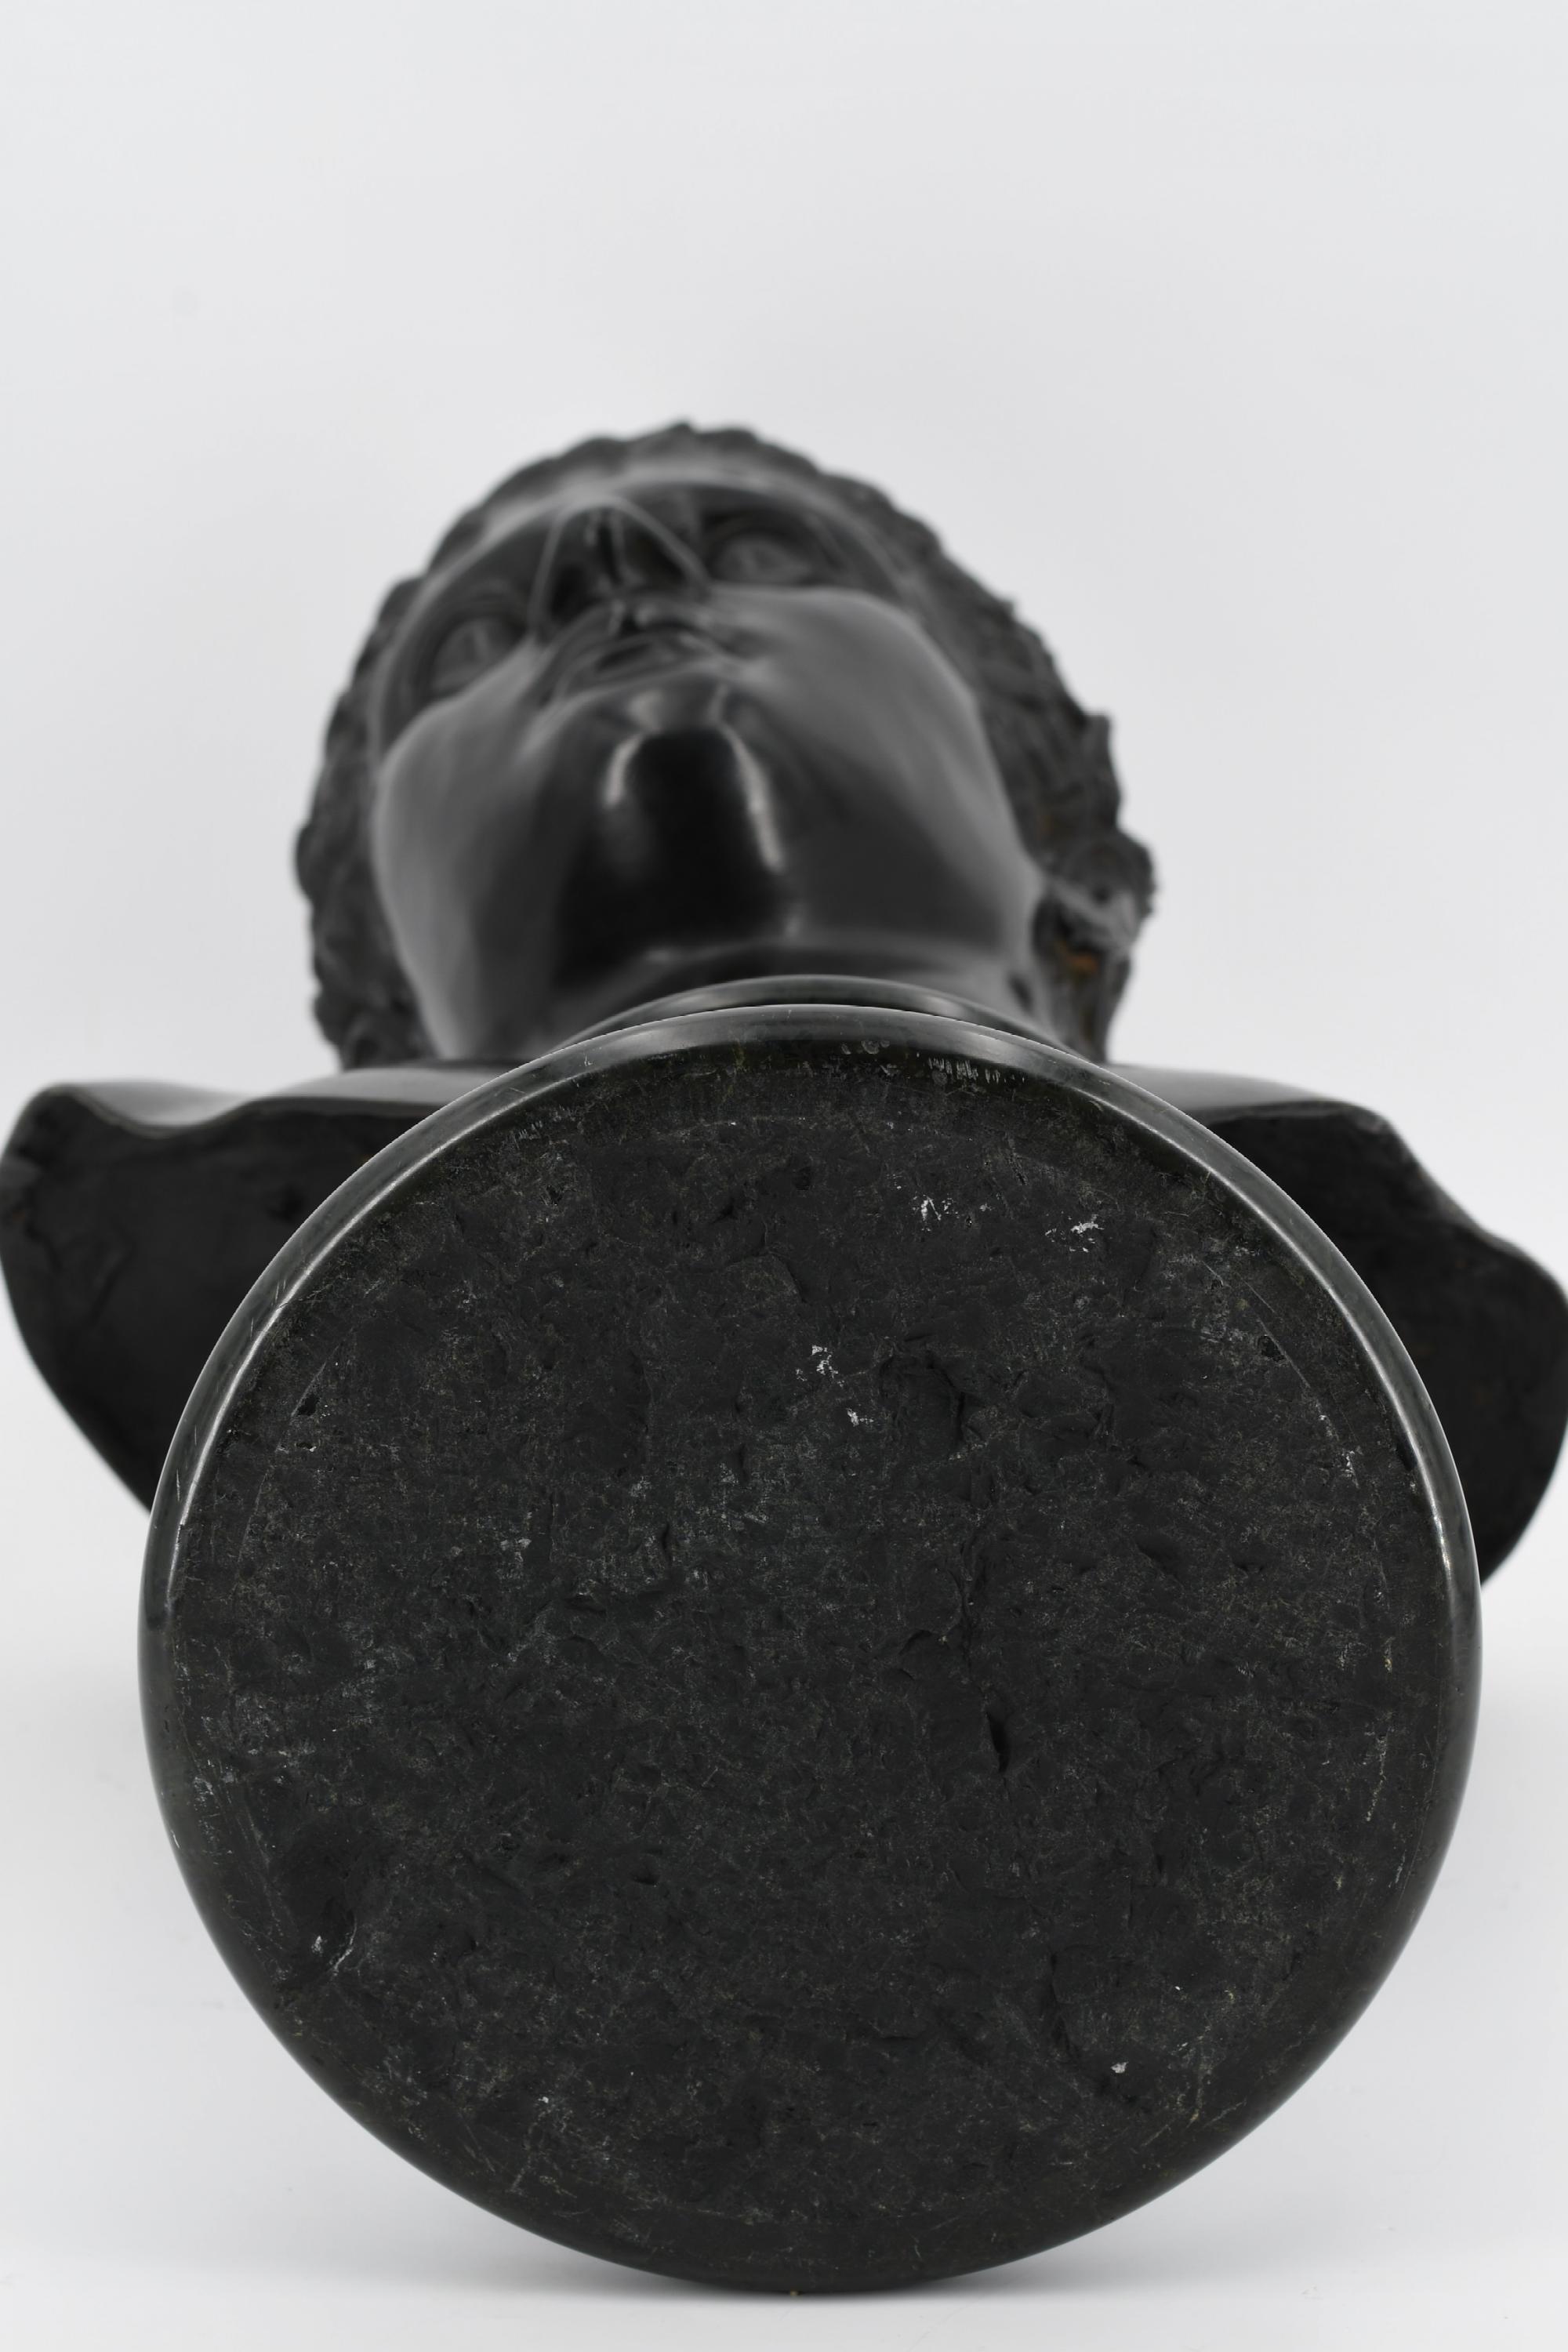 COPY OF AN ANTIQUE BRONZE BUST OF A YOUNG BOY. - Image 2 of 2